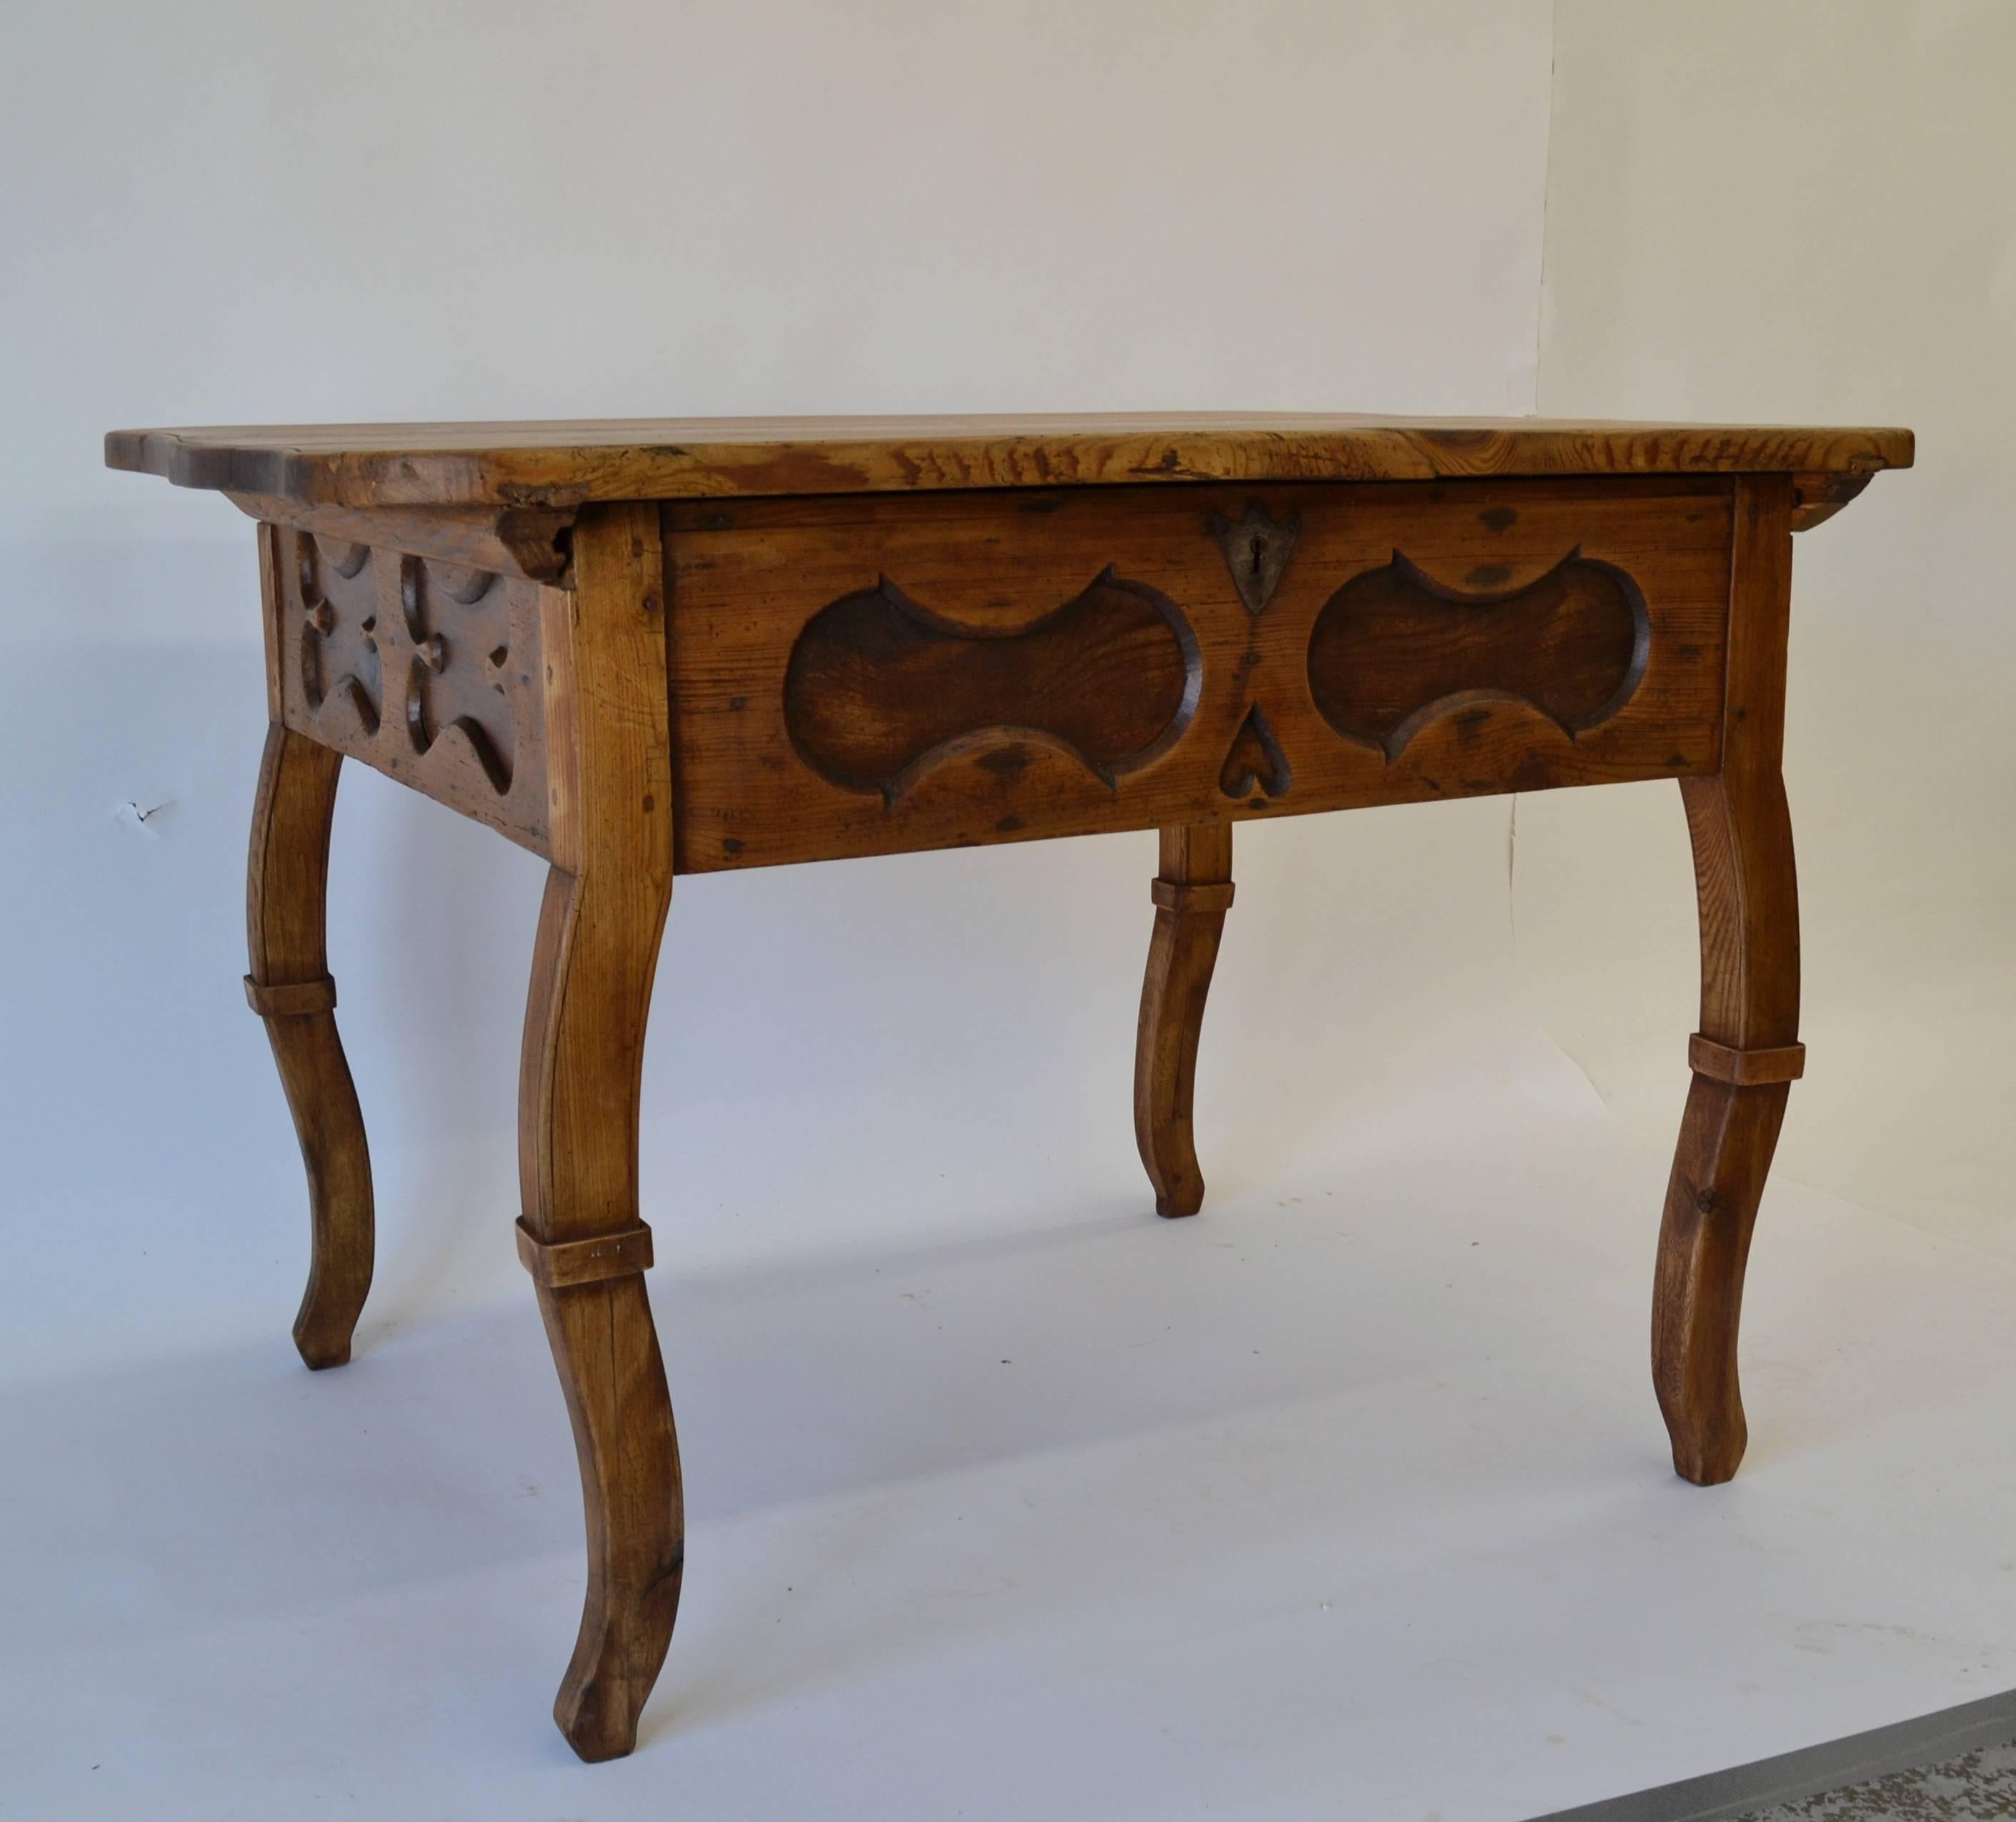 A most unusual find, this substantial pitch pine baroque-style centre table has a thick top, serpentine on all four sides with an incised band to the top edge. The top unlocks on its original lock (the key is a replacement) and slides backwards to